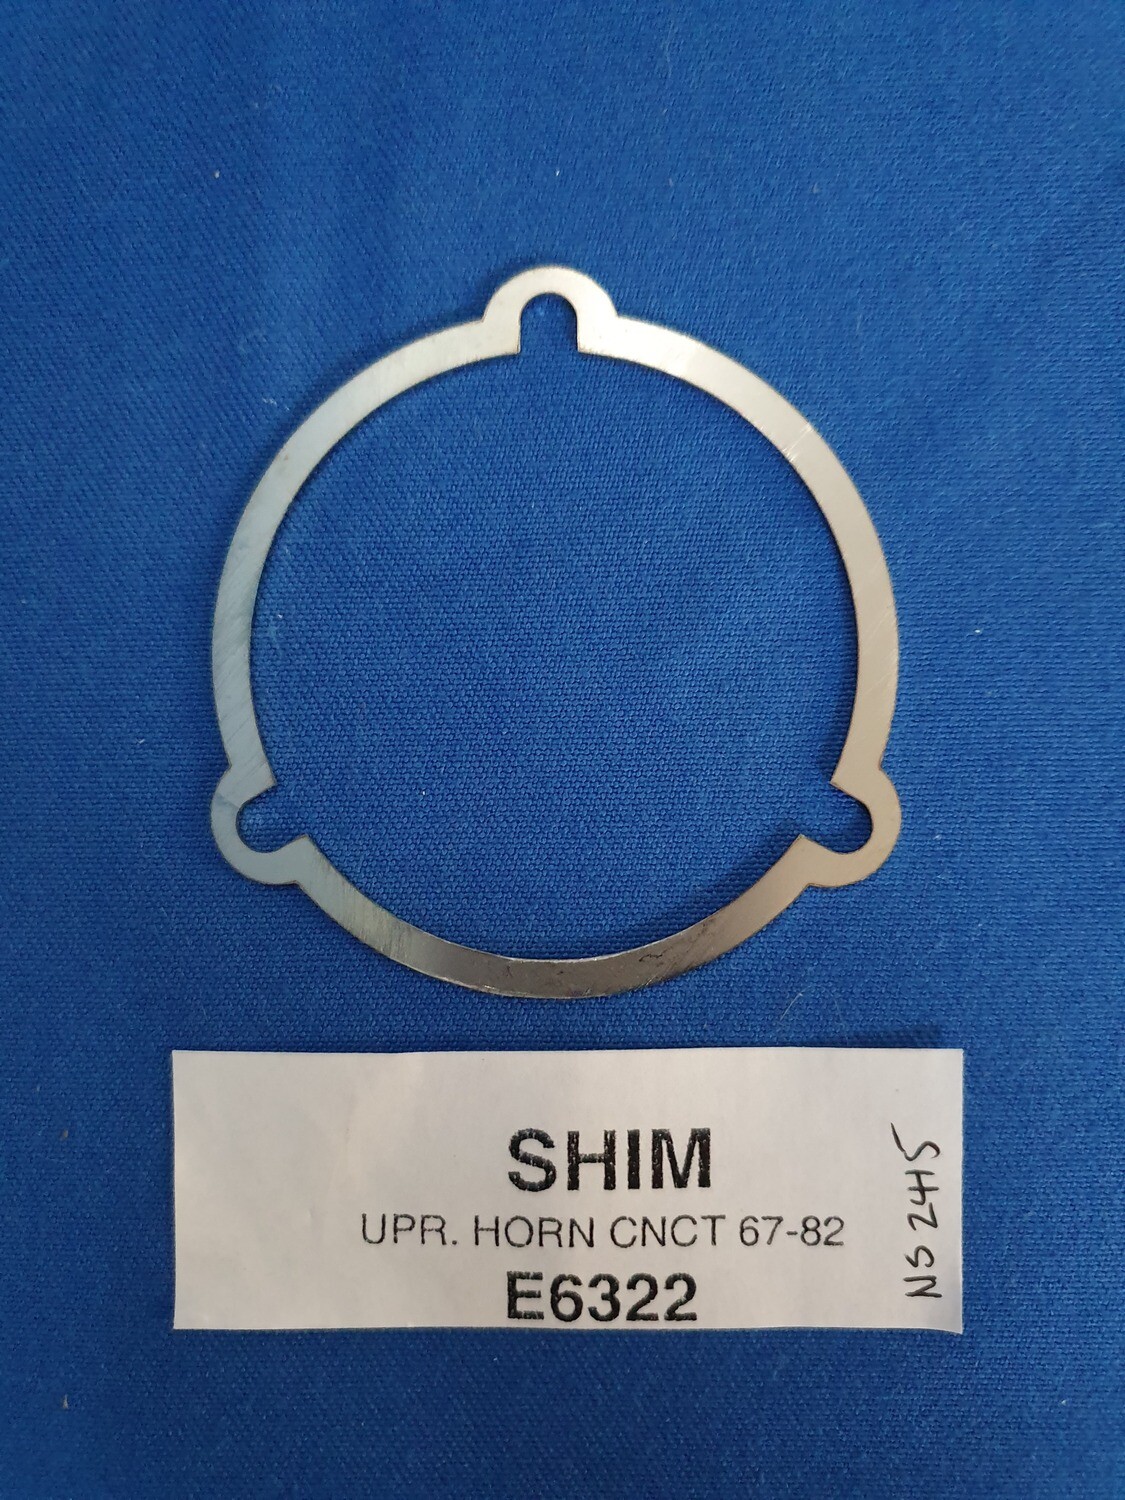 SHIM-UPPER HORN CONTACT-WITH TELESCOPIC-STAINLESS STEEL-USA-67-82 (#E6322) 1D1